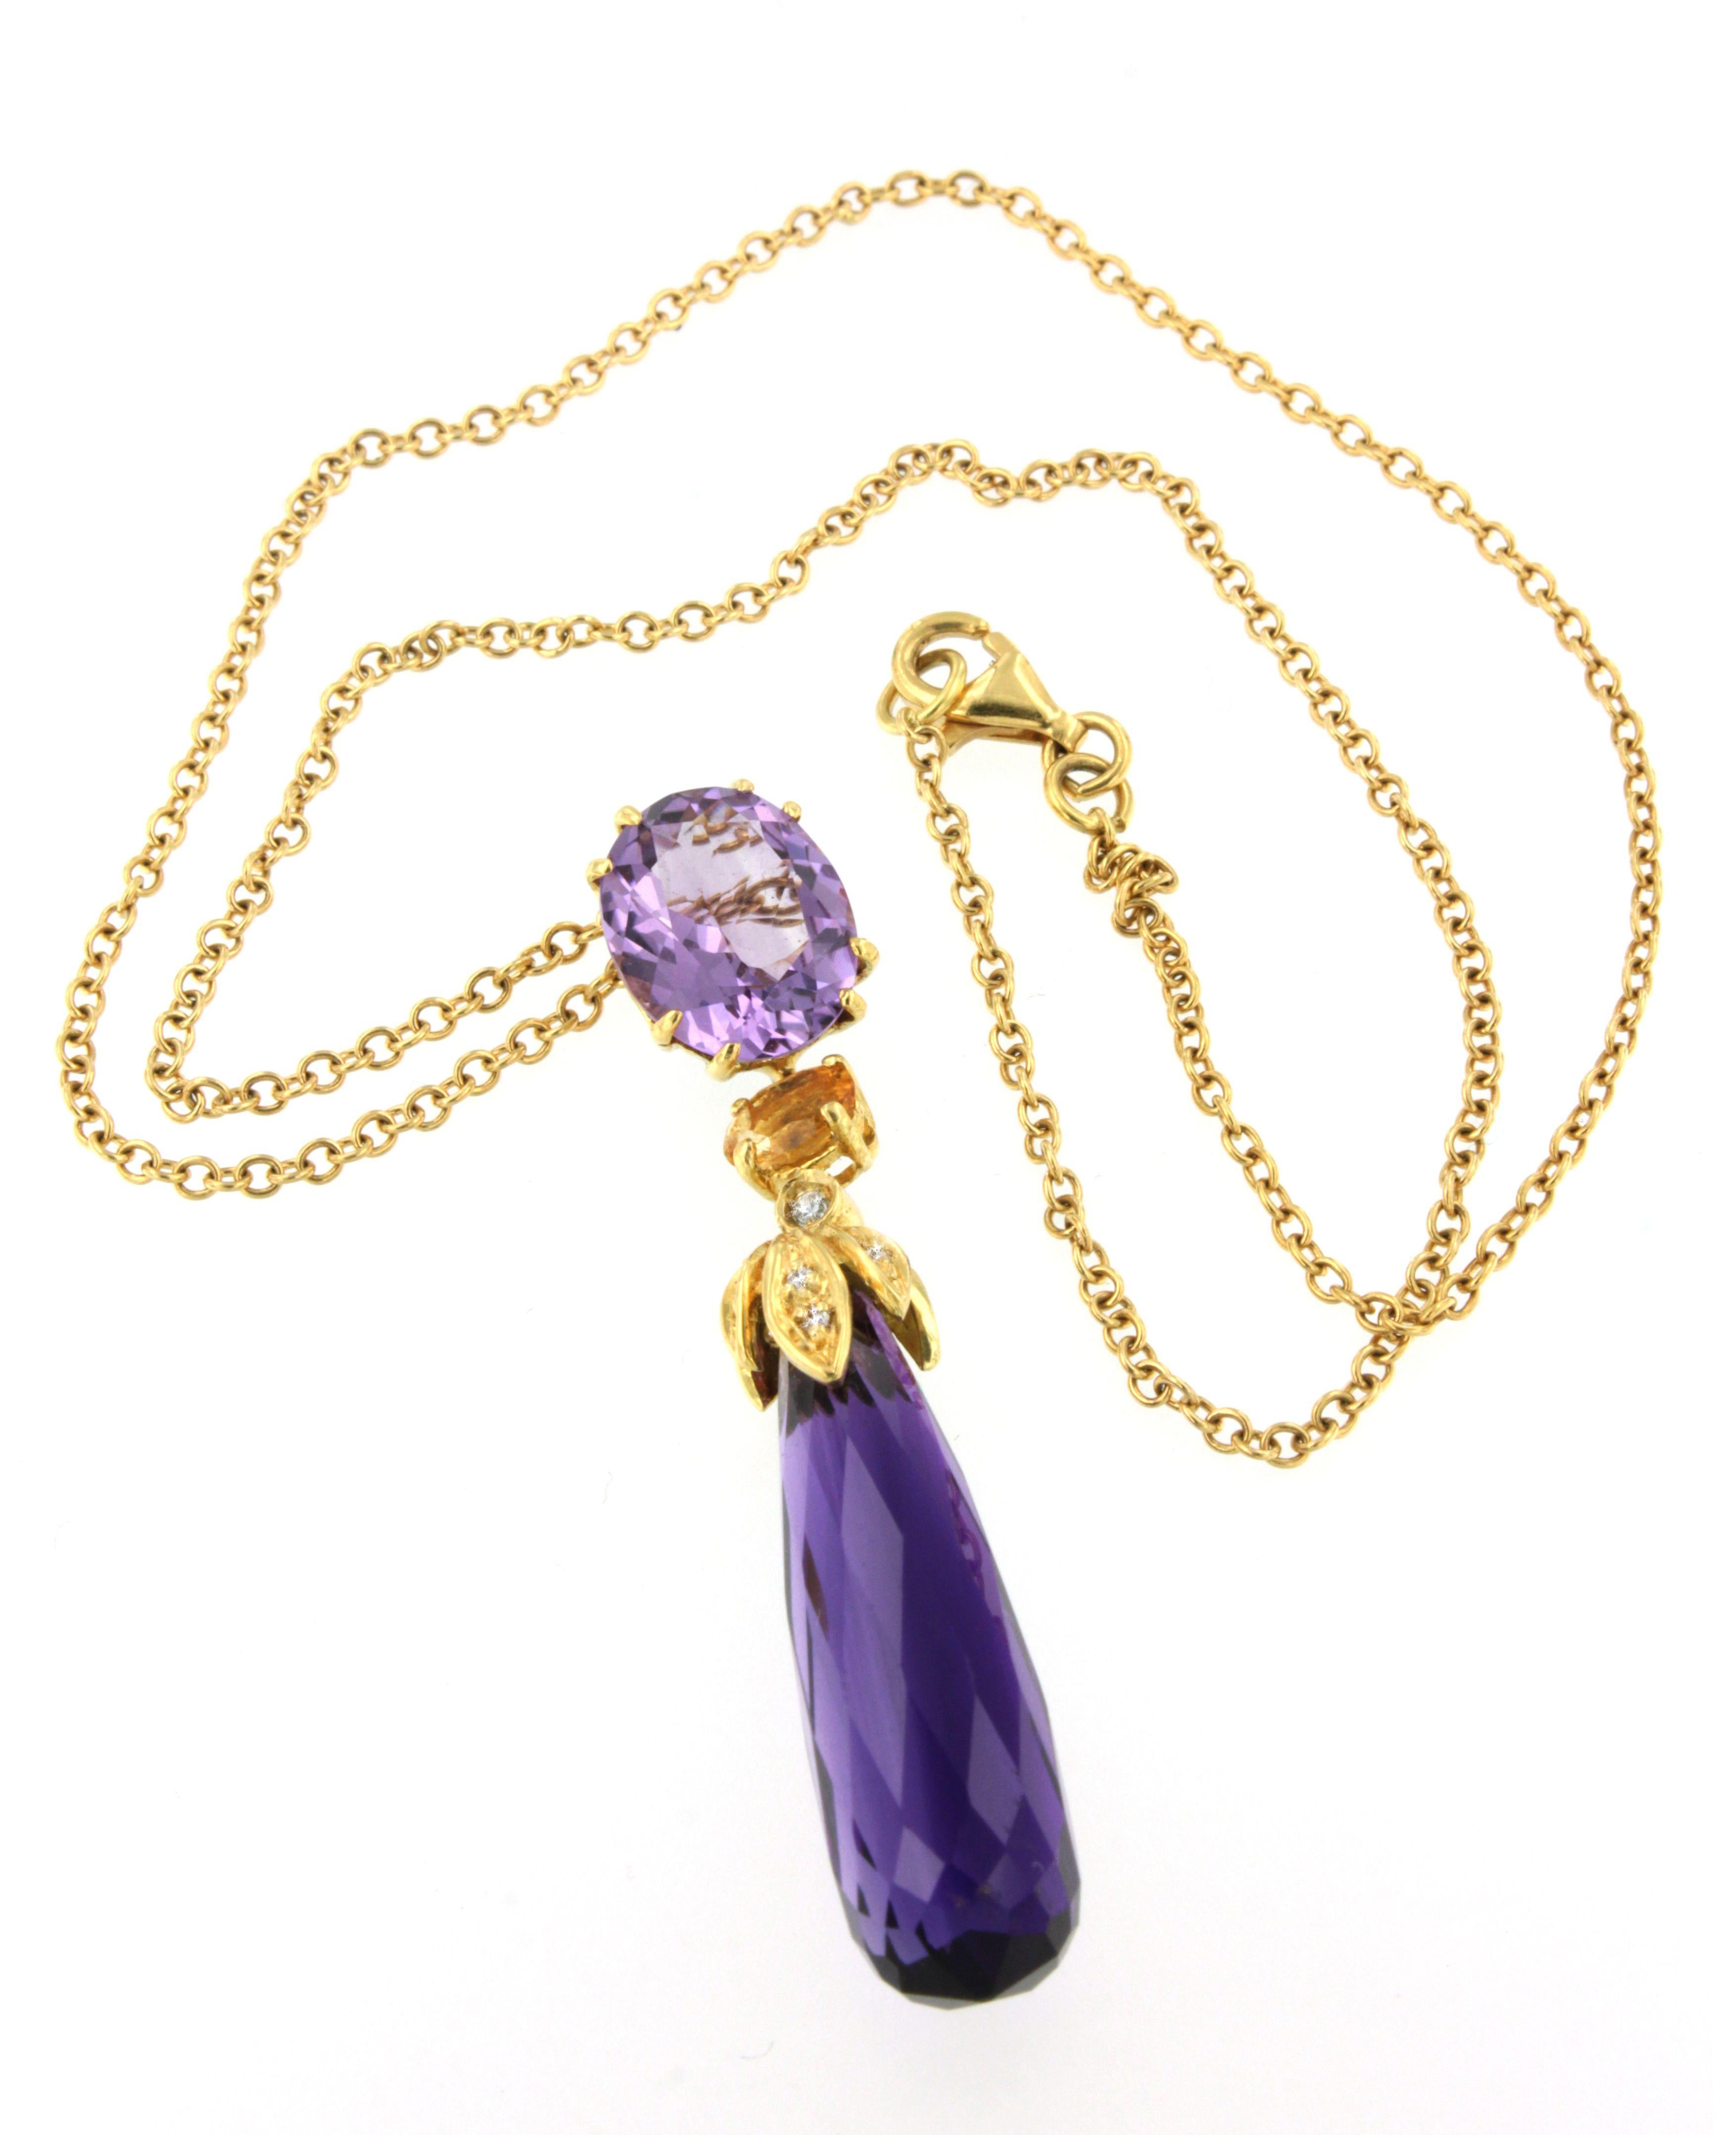 Classical shapes create a unique jewel made in Italy by Stanoppi Jewellery since 1948.
 Trendy and pretty pendant by Stanoppi Jewellery . The combination of colors is very unique.
Amethyst (drop cut, size: mm), Citrine (oval cut, size: mm) and White